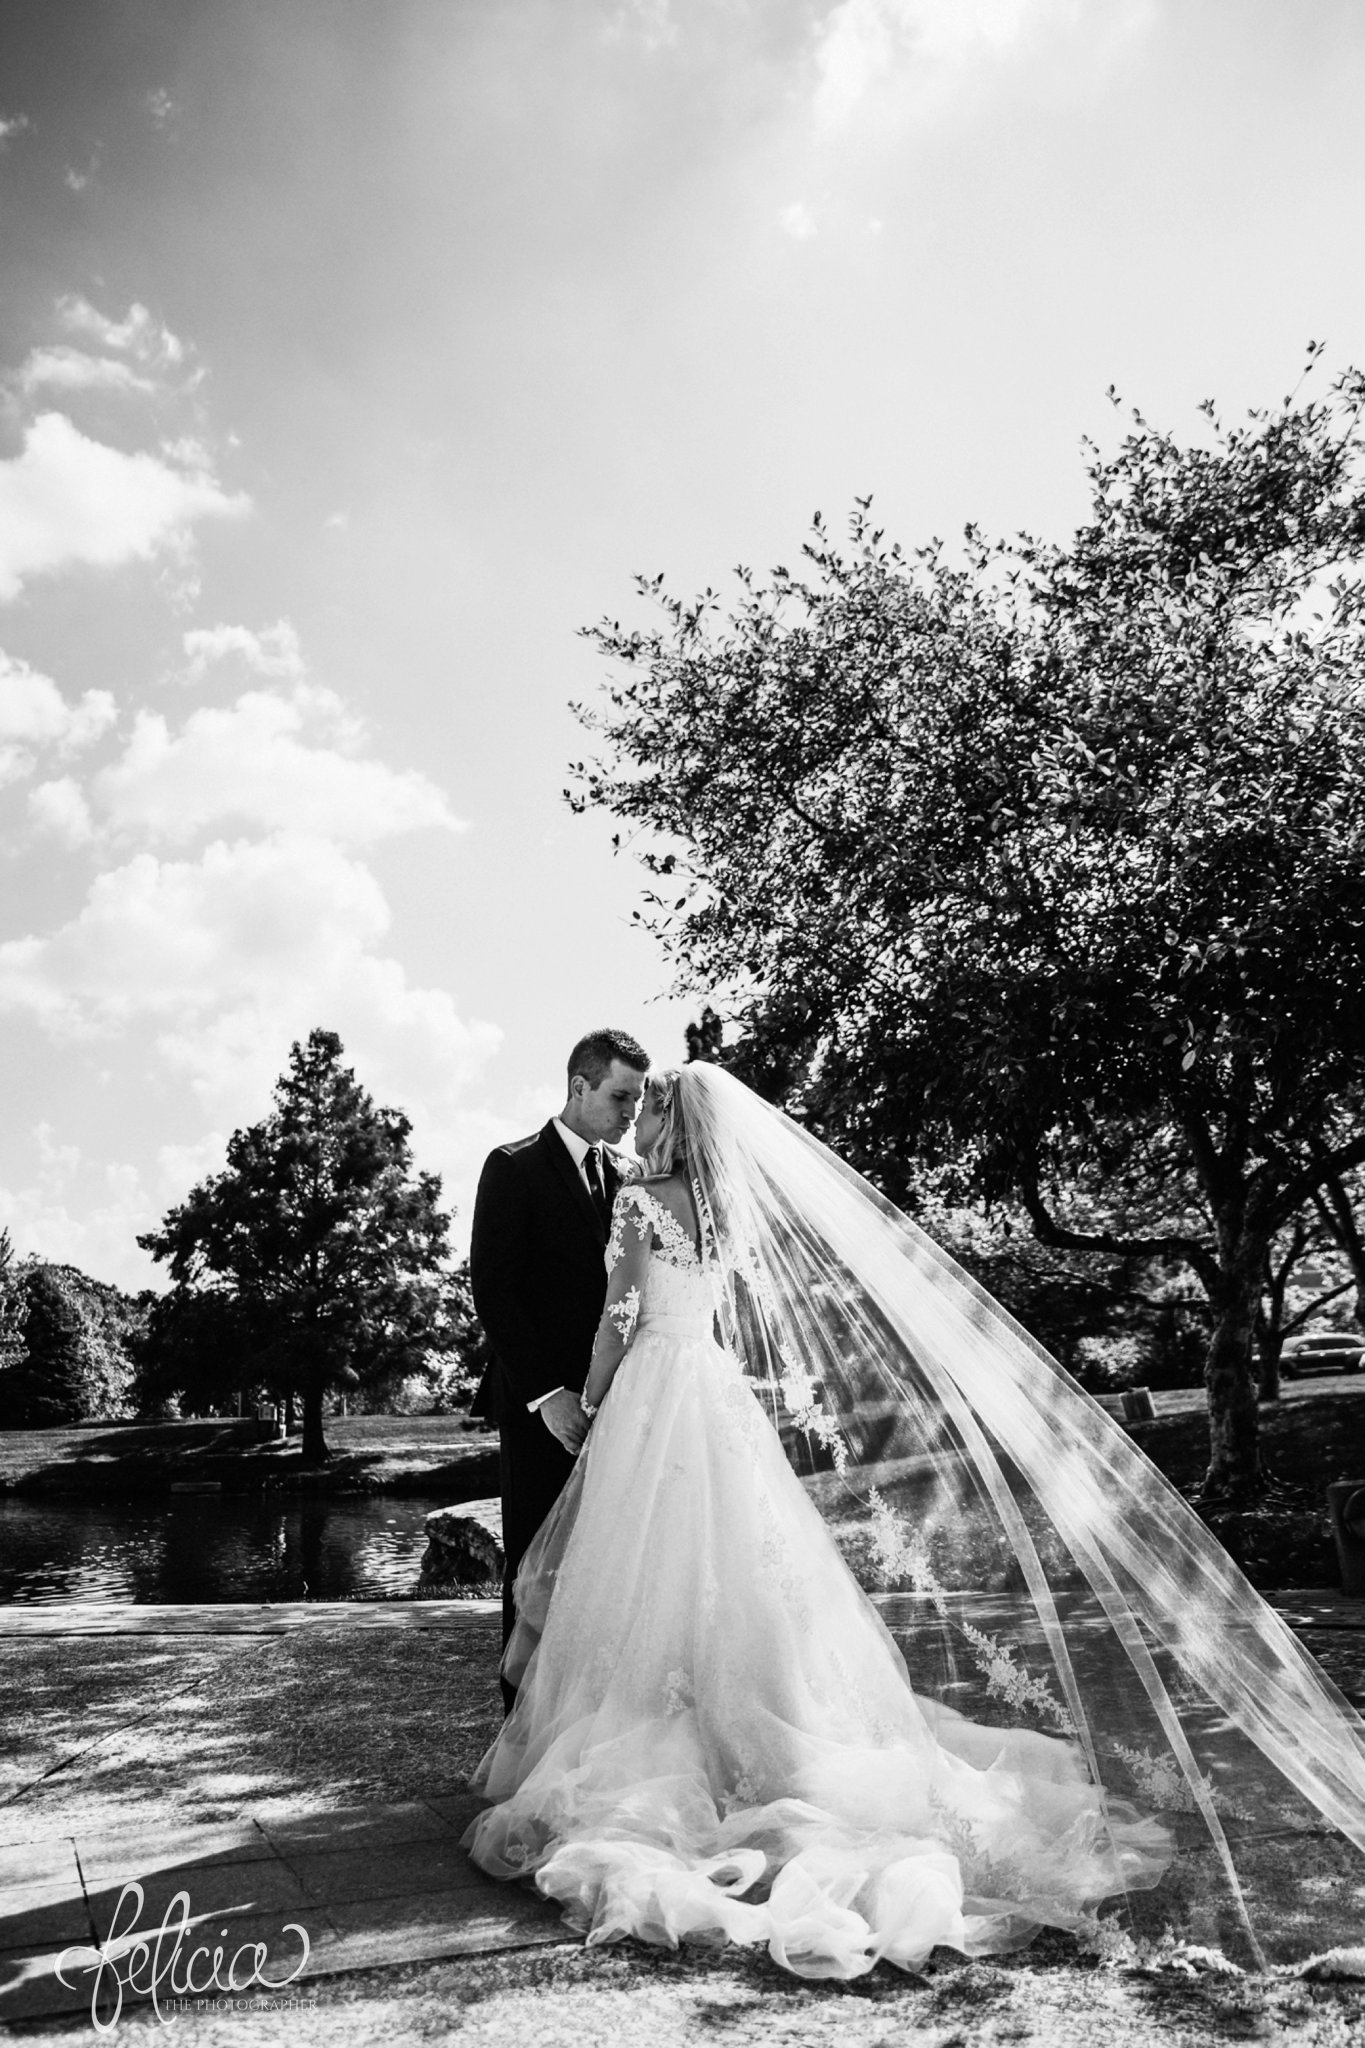 images by feliciathephotographer.com | wedding photographer | kansas city | redemptorist | classic | portrait | whimsical | romantic | flowing veil | lace long sleeve dress | bride and groom | trees | black and white | 